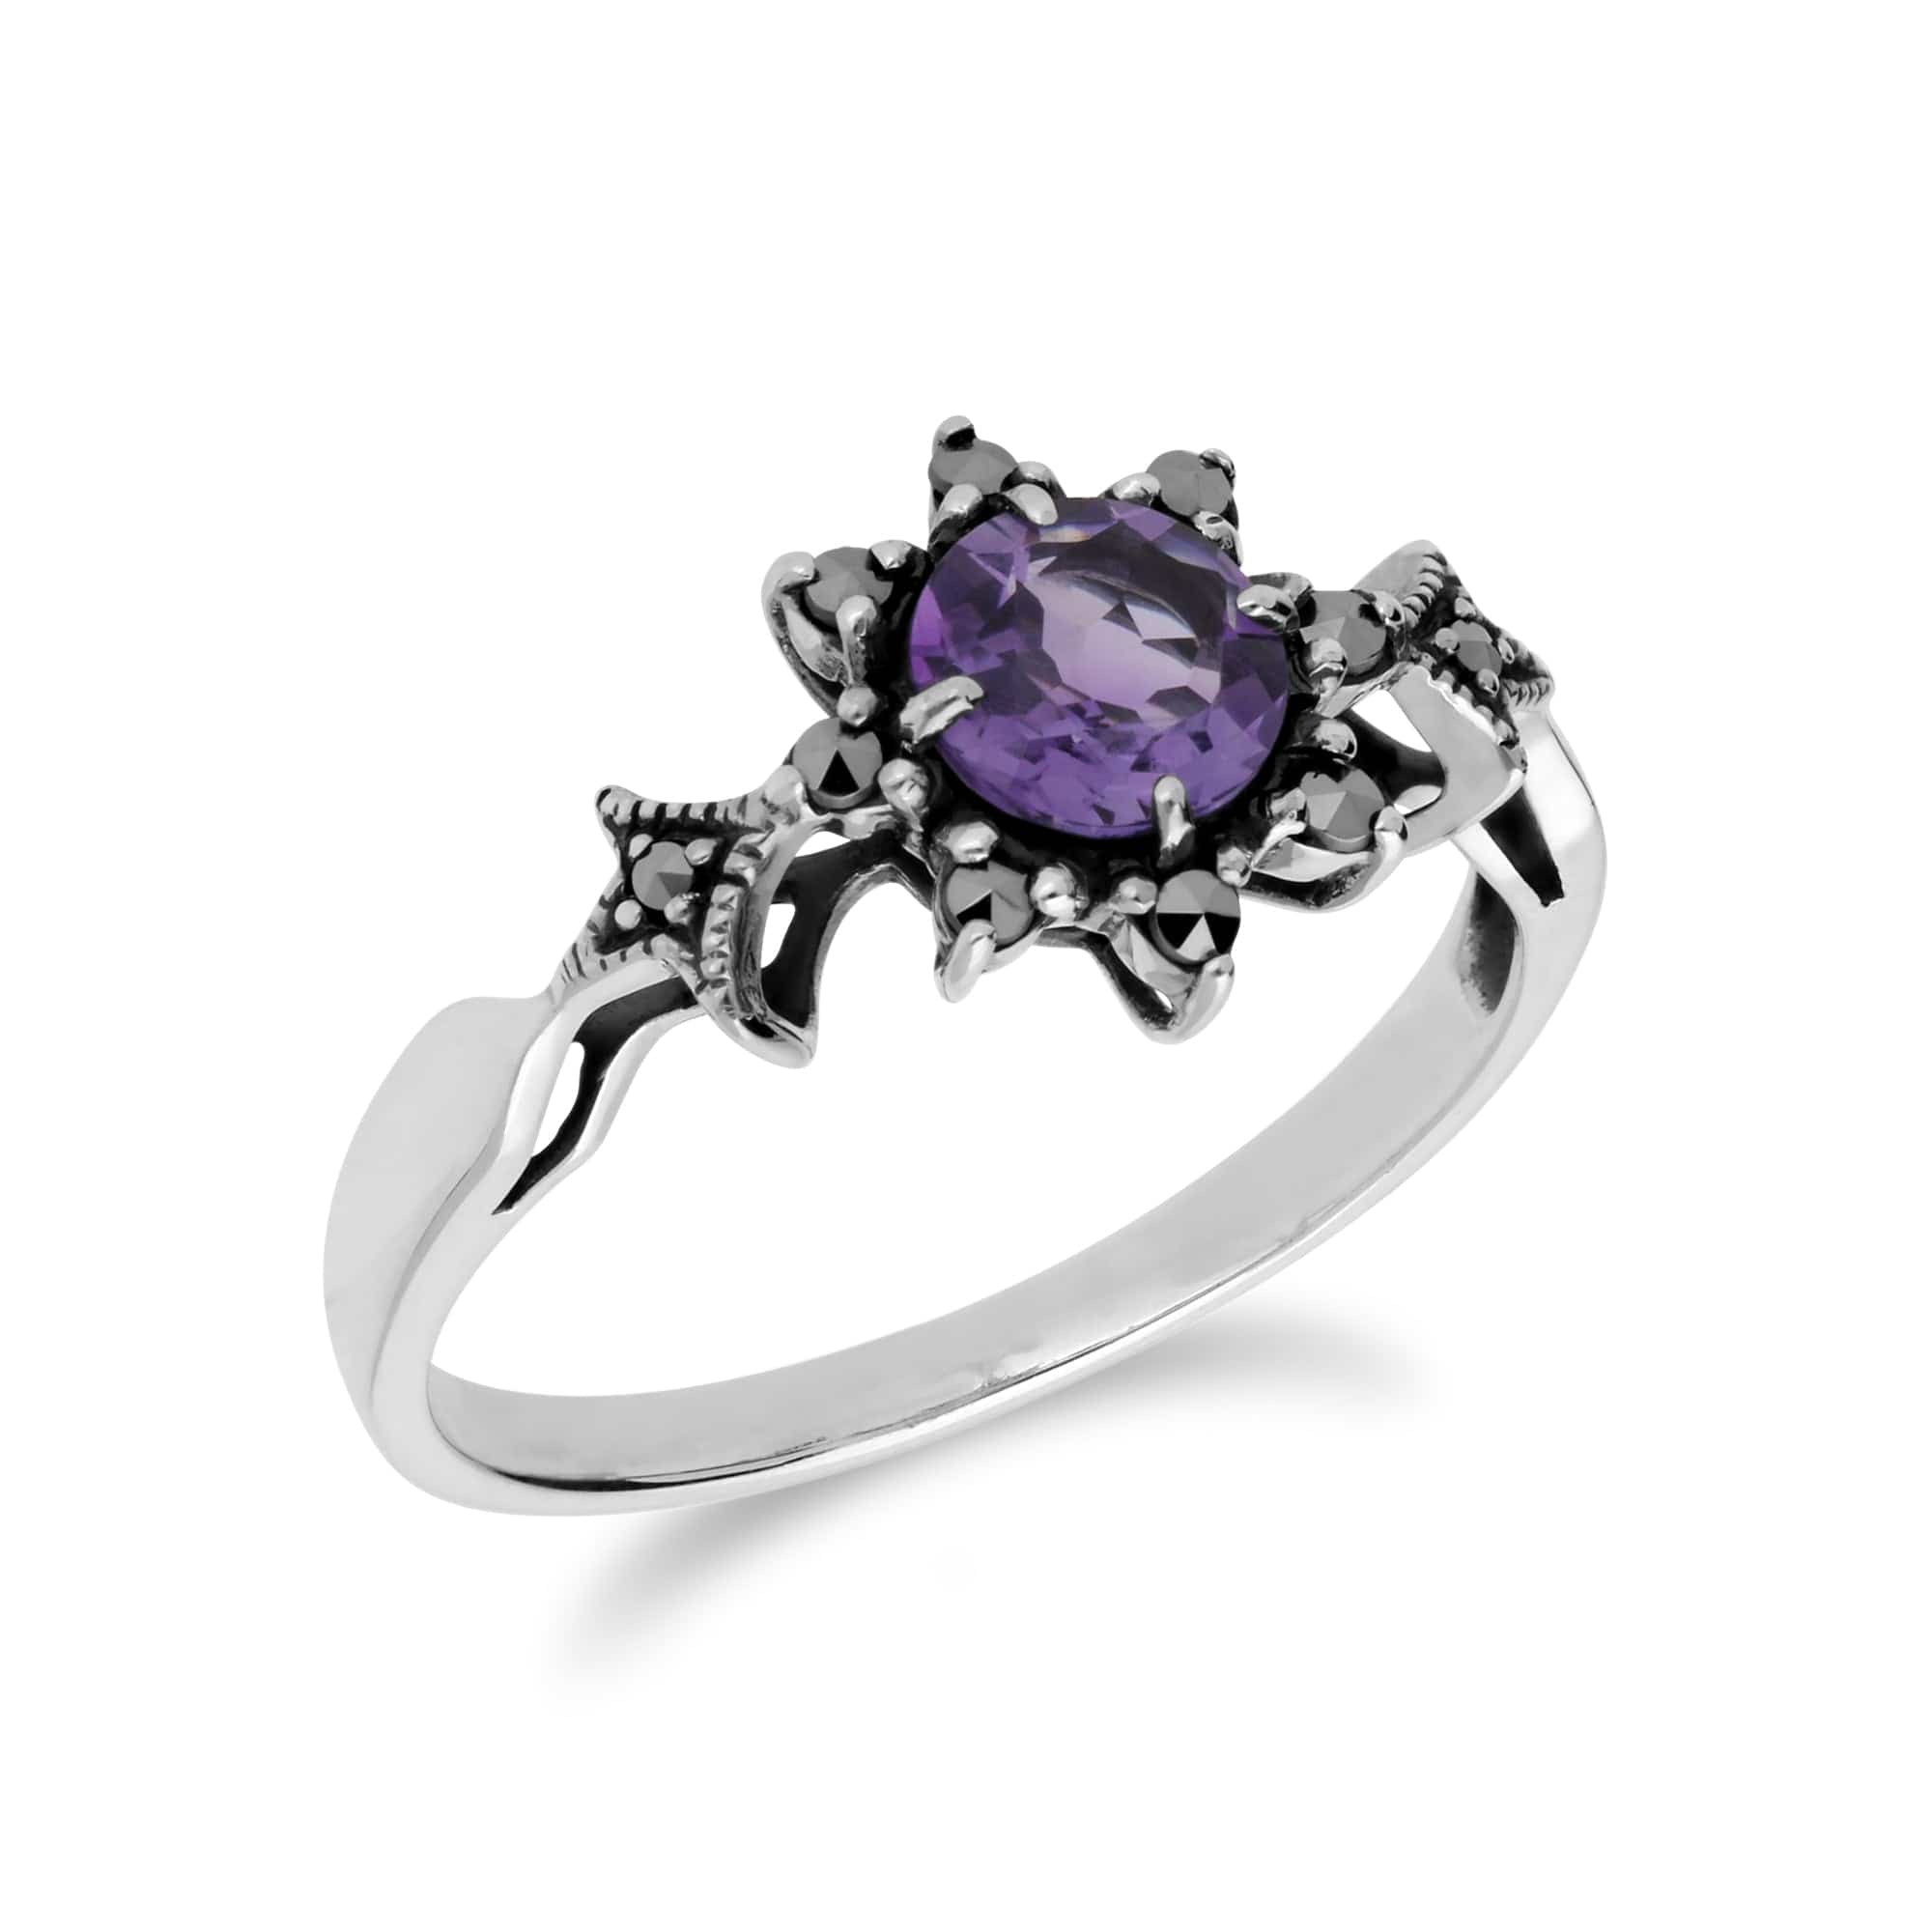 214R599502925 Art Nouveau Style Round Amethyst & Marcasite Floral Ring in 925 Sterling Silver 2